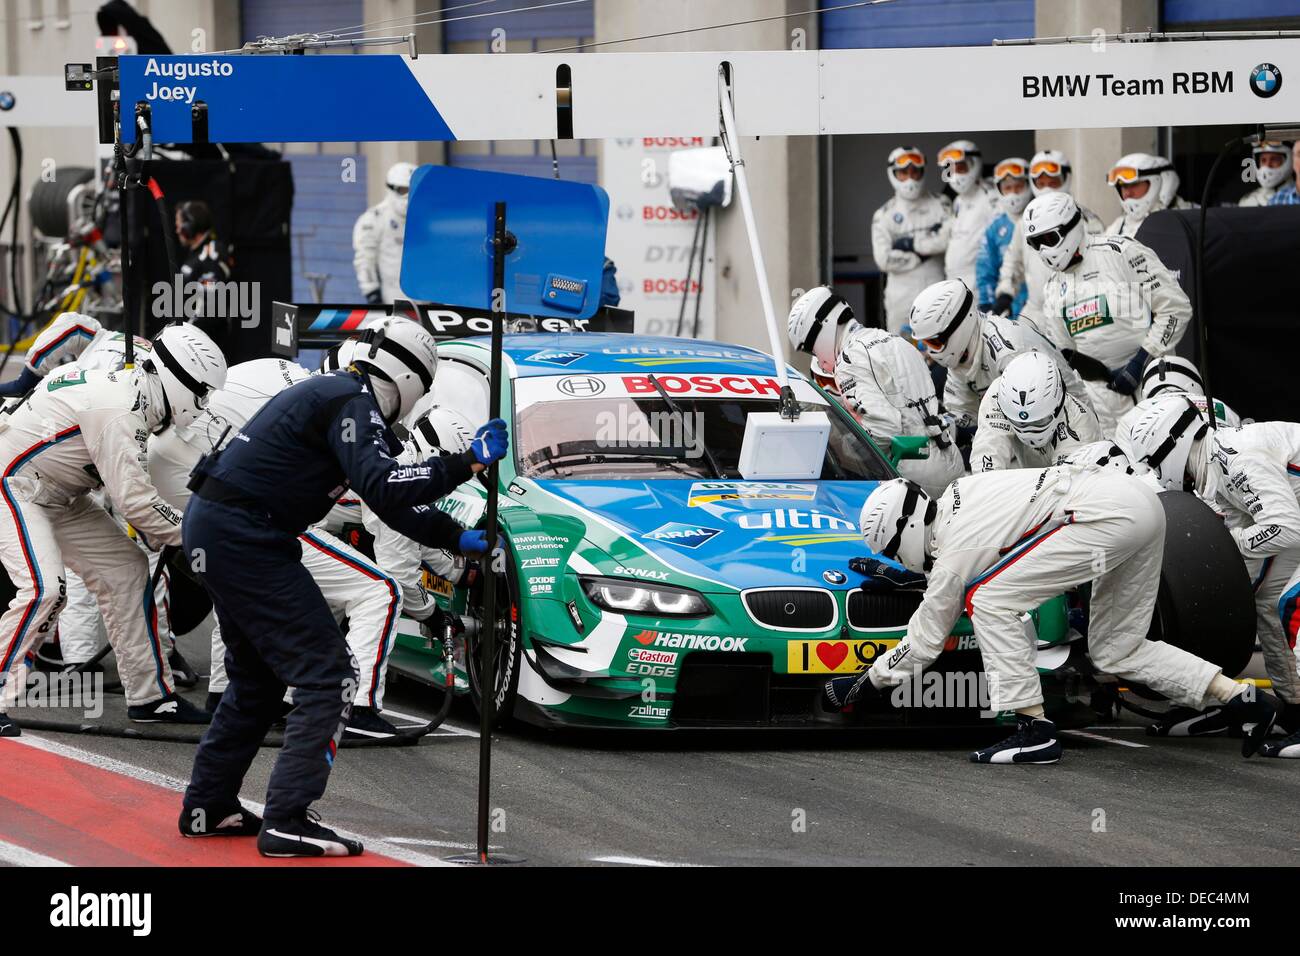 A handout photo released by Hoch Zwei on 15 September 2013 shows the Brazilian BMW-pilot Augusto Farfus during the pit stopp at the 8th race of the DTM in Oschersleben, Germany. Stock Photo